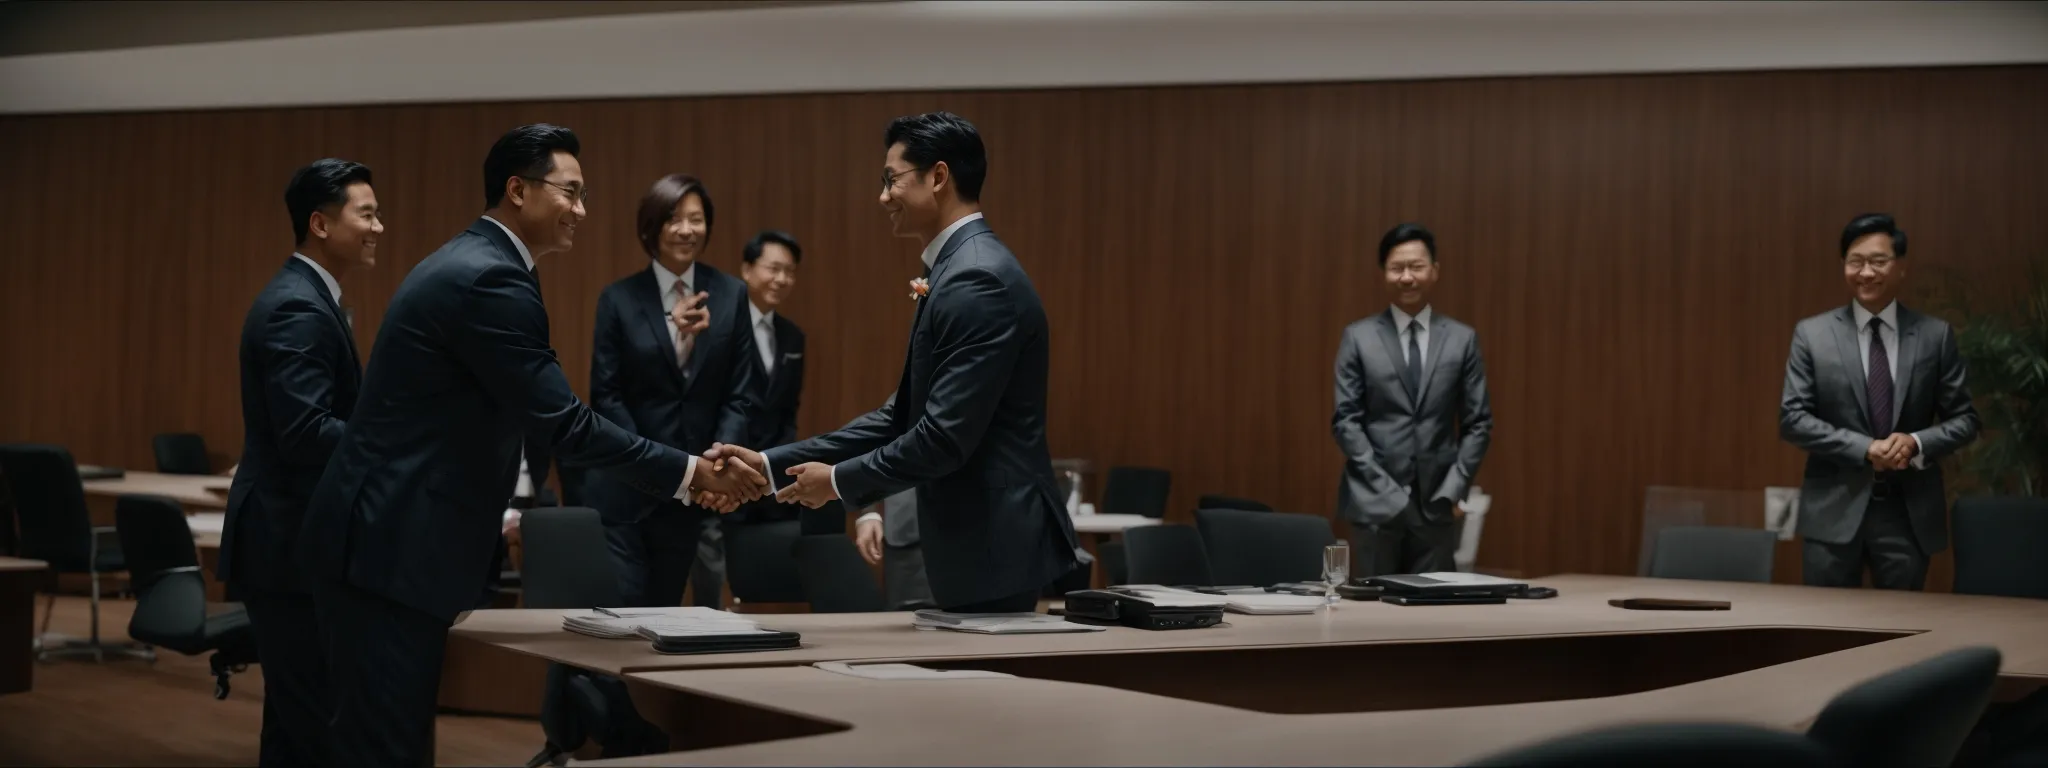 two executives shaking hands across a table in a formal meeting room.